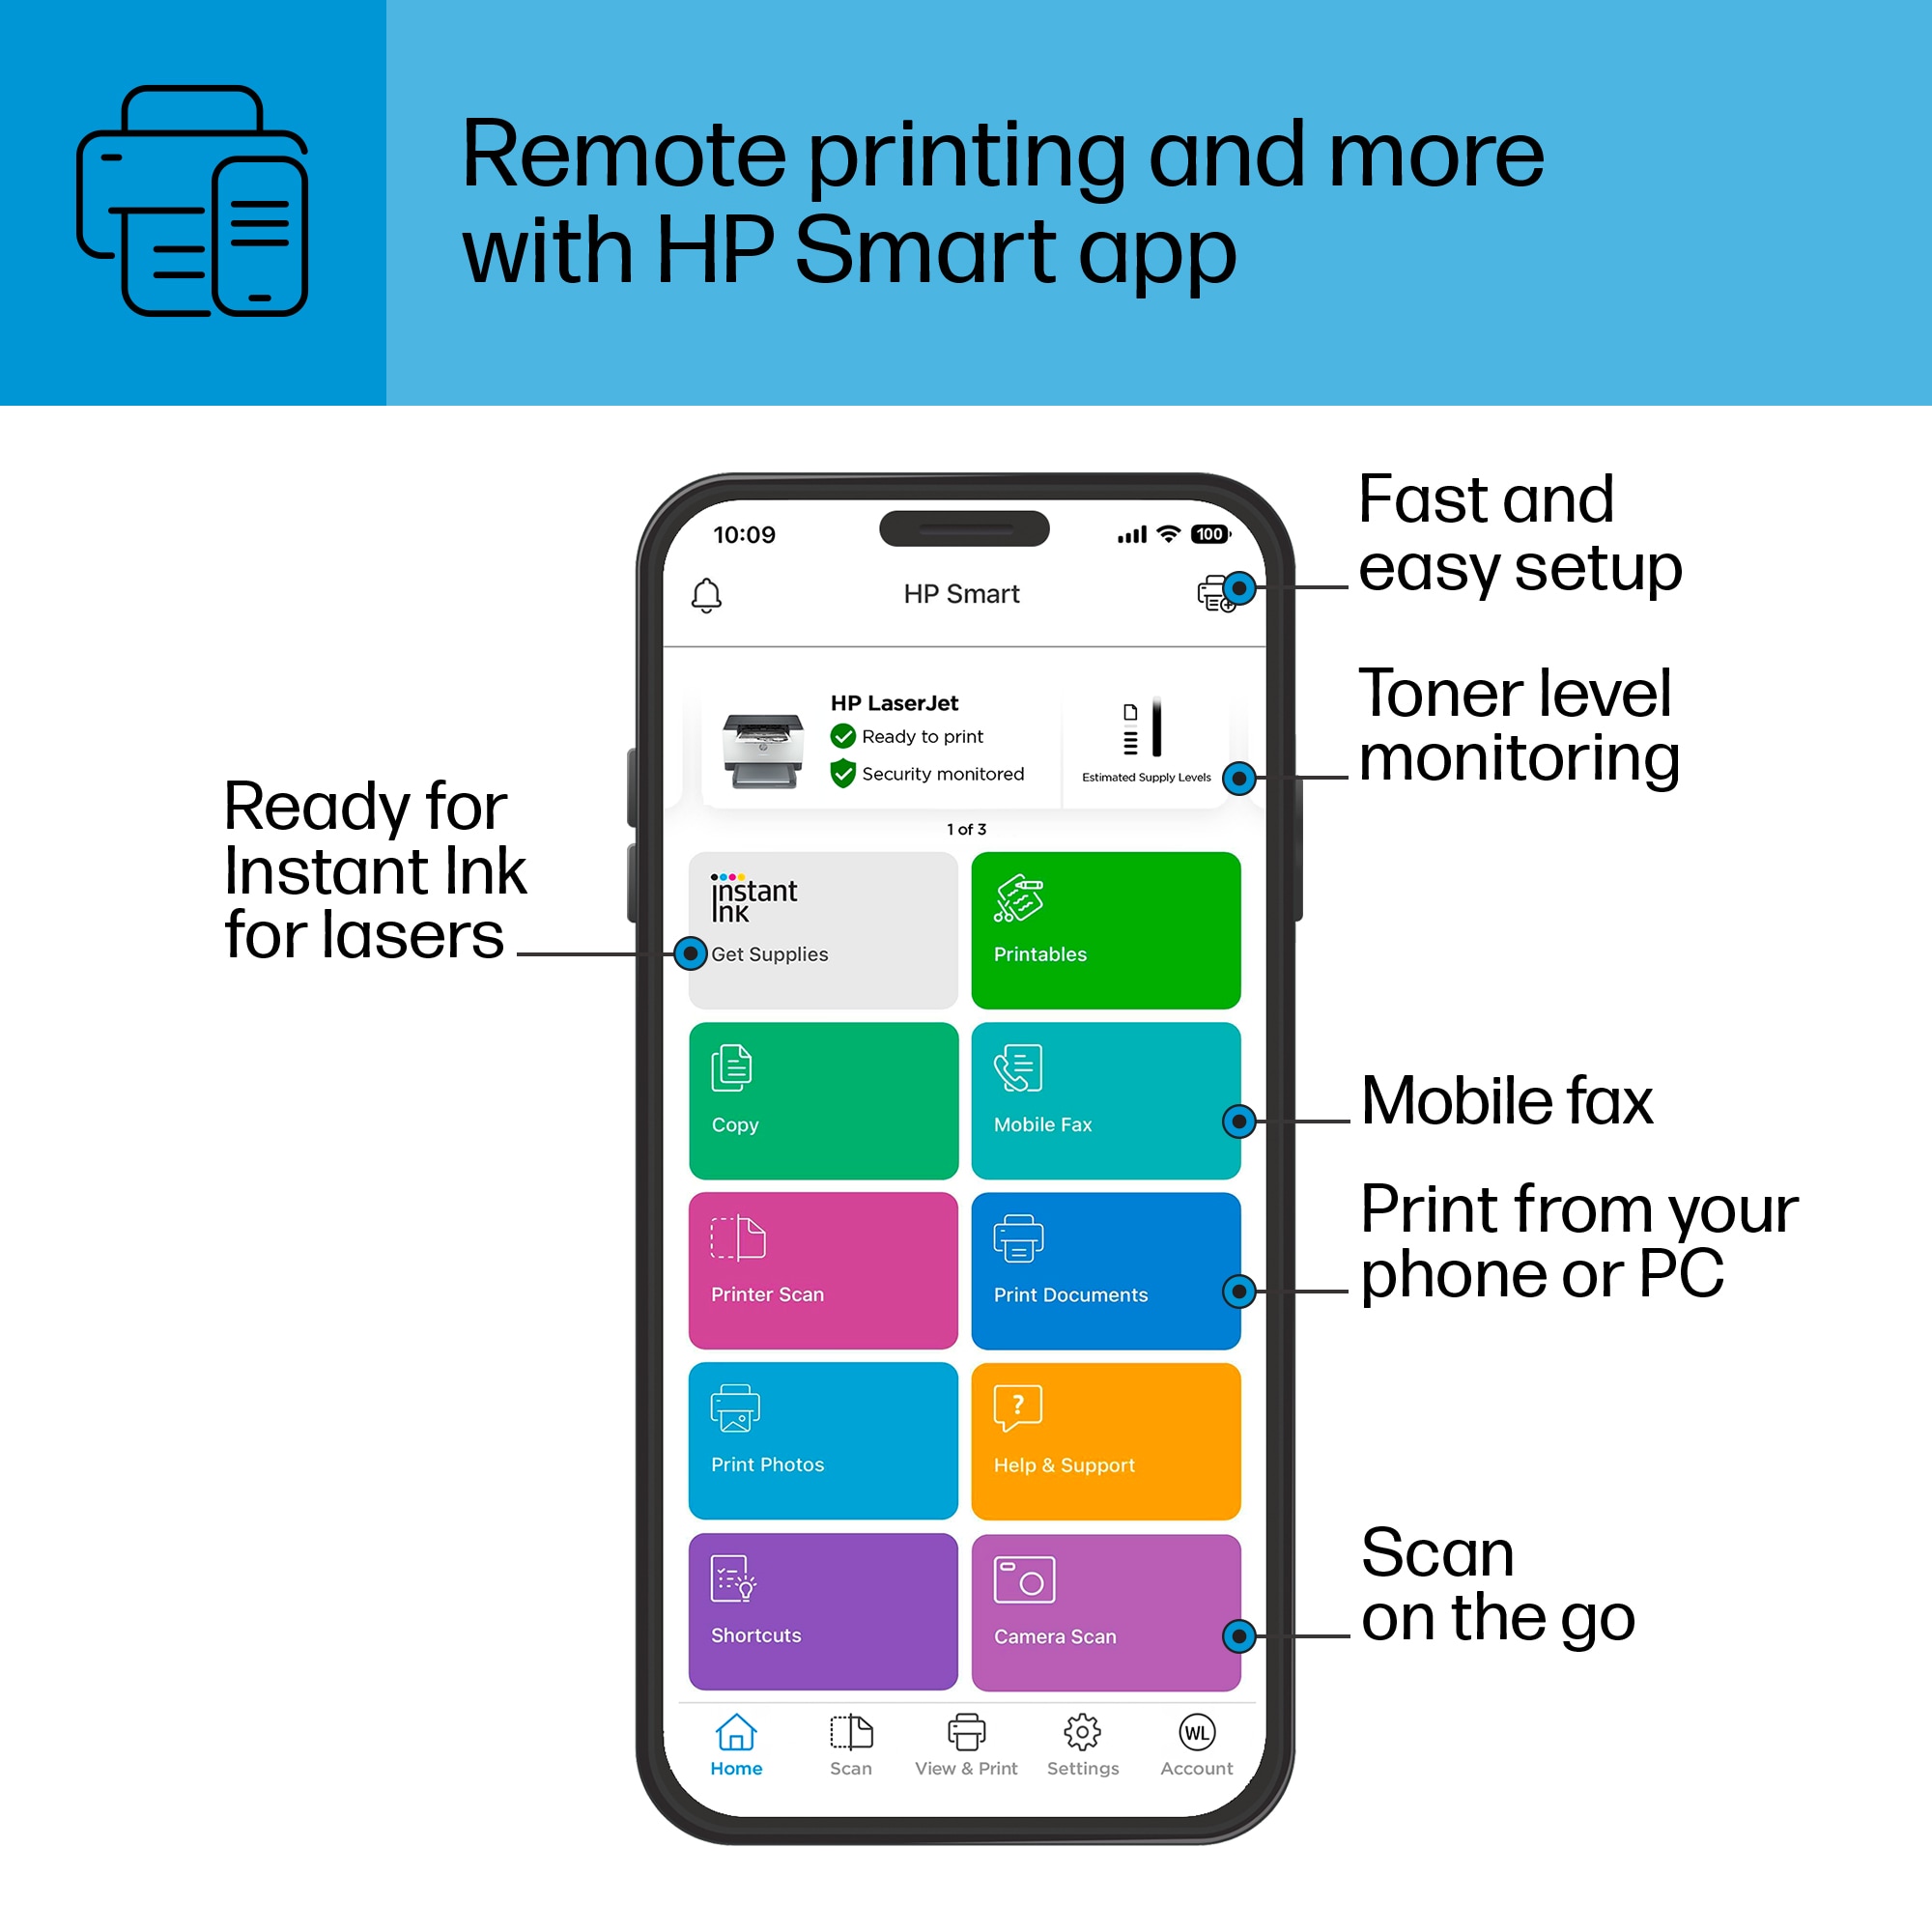 HP Ink months Printer with 2 LaserJet available Instant M209dw